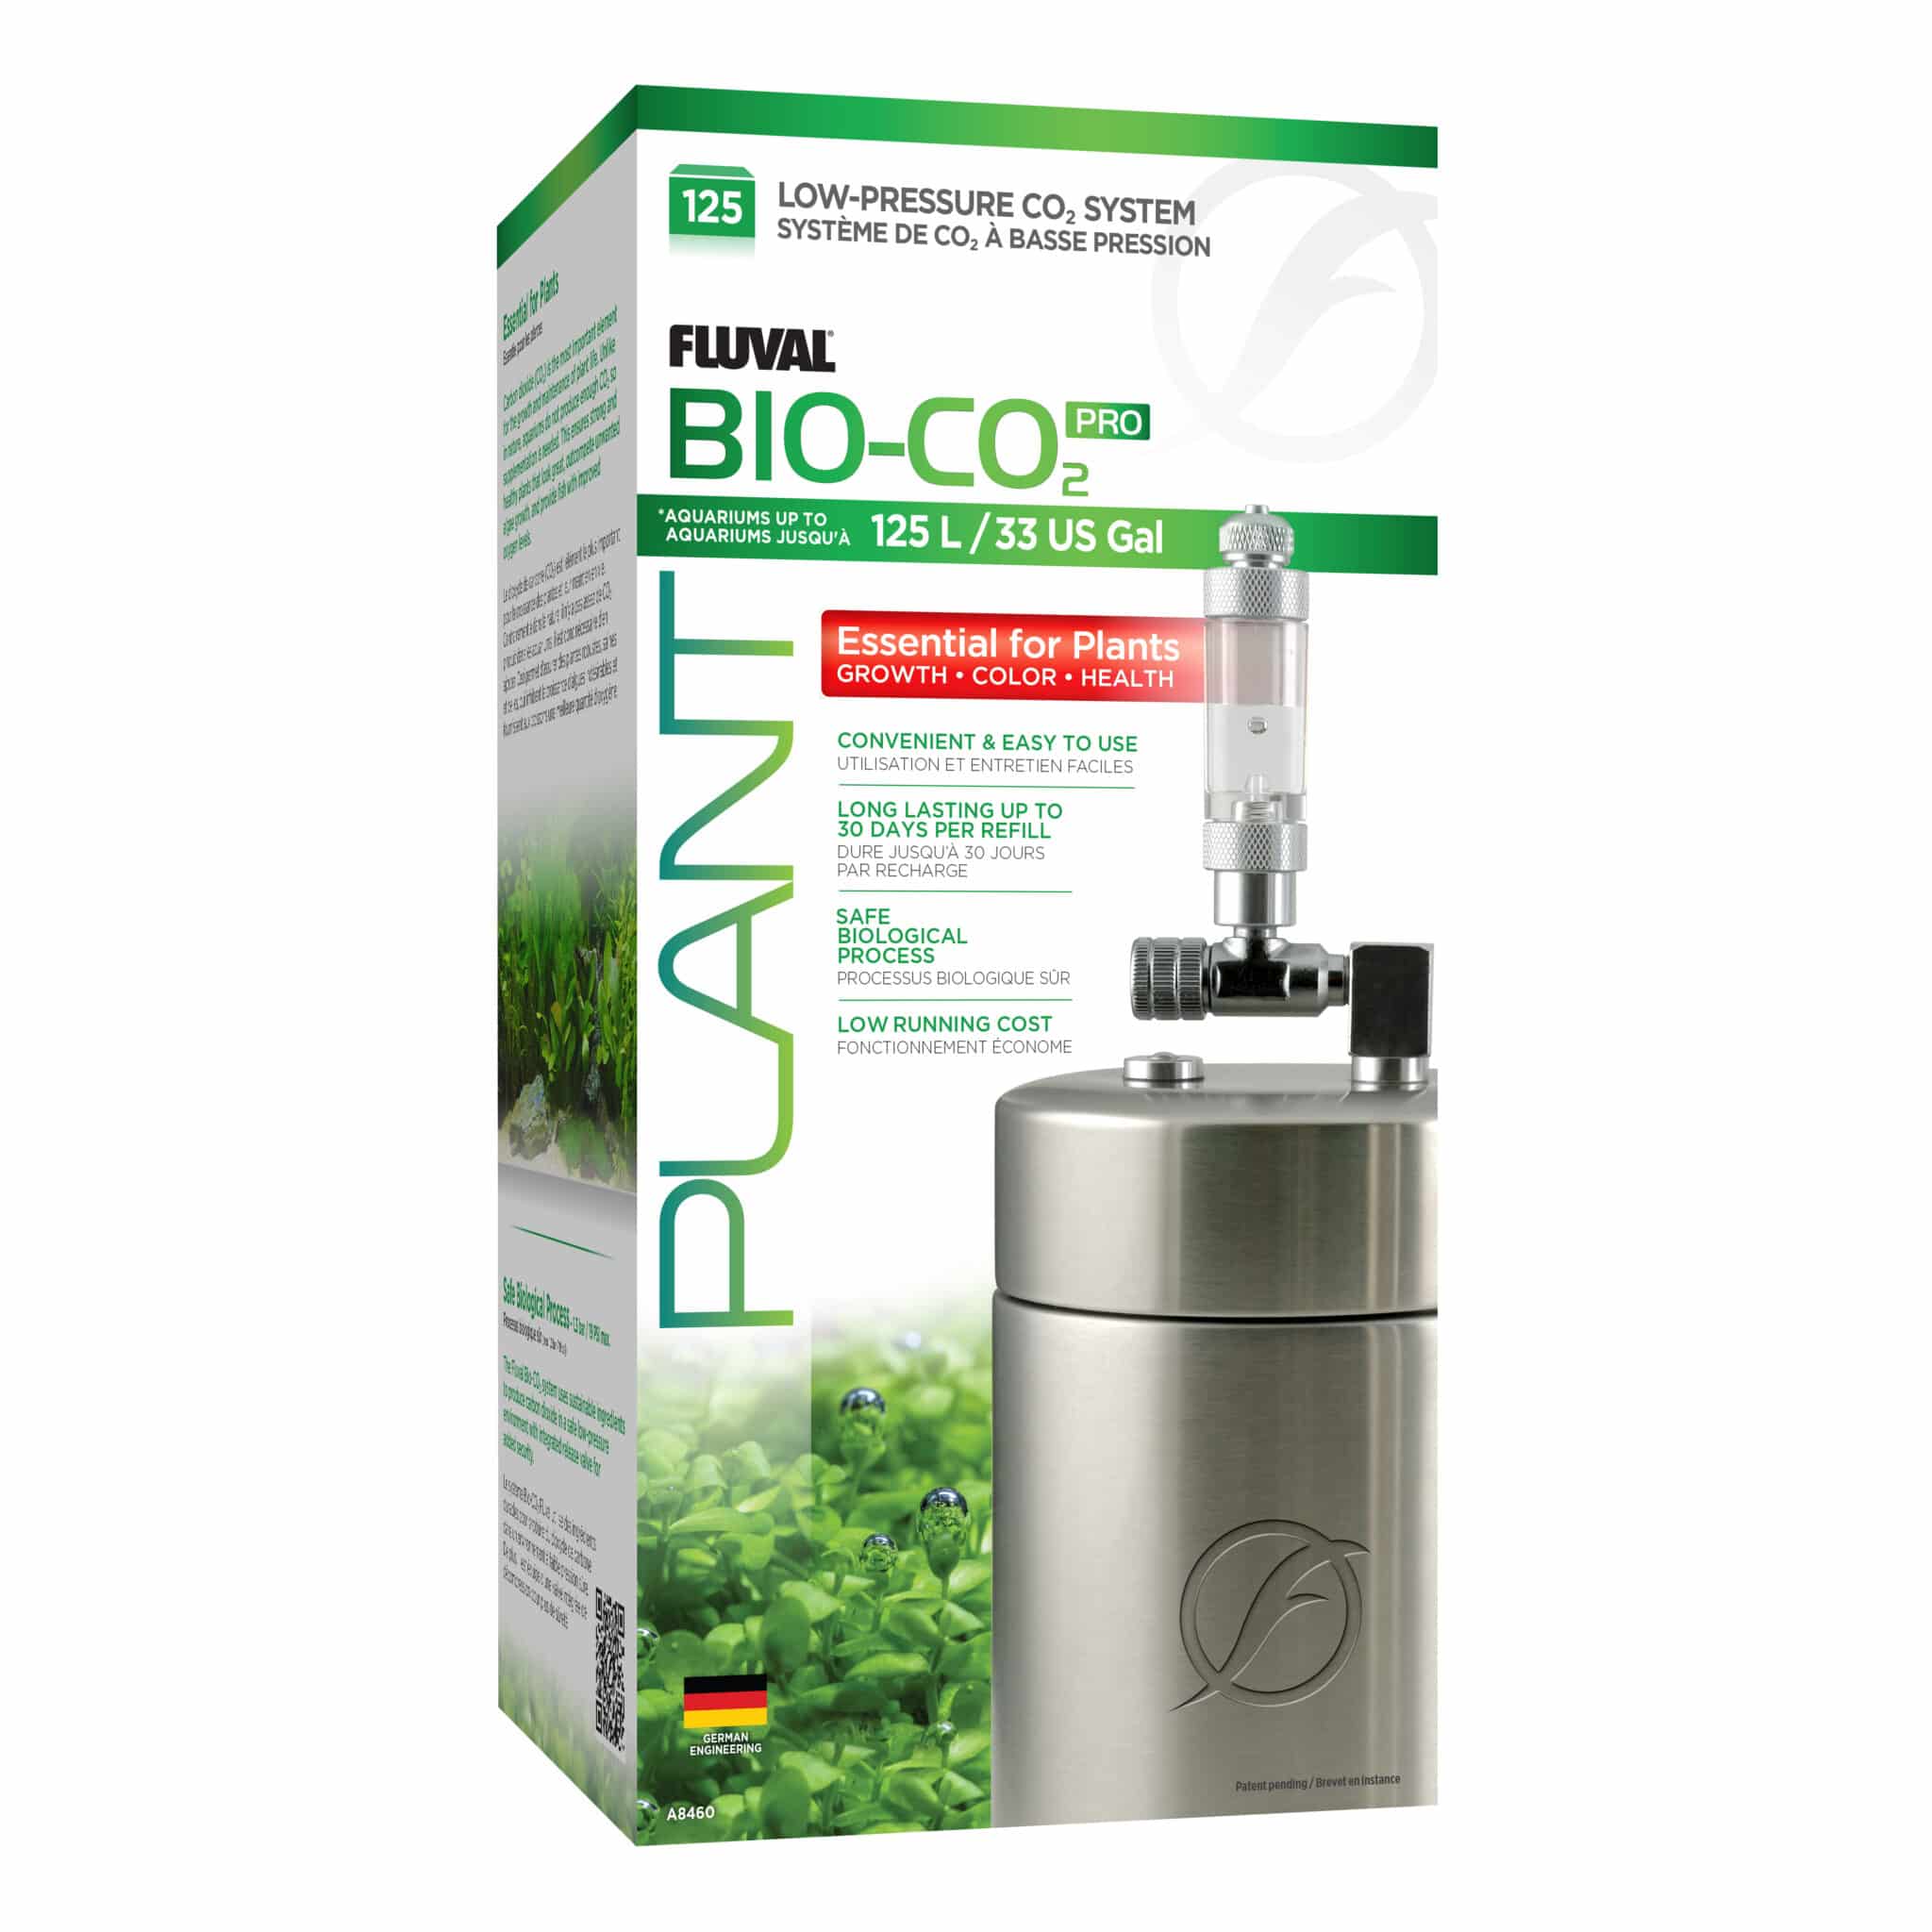 Fluval Bio-CO2 Pro Low-Pressure System, up to 33 US Gal / 125 L - A8460